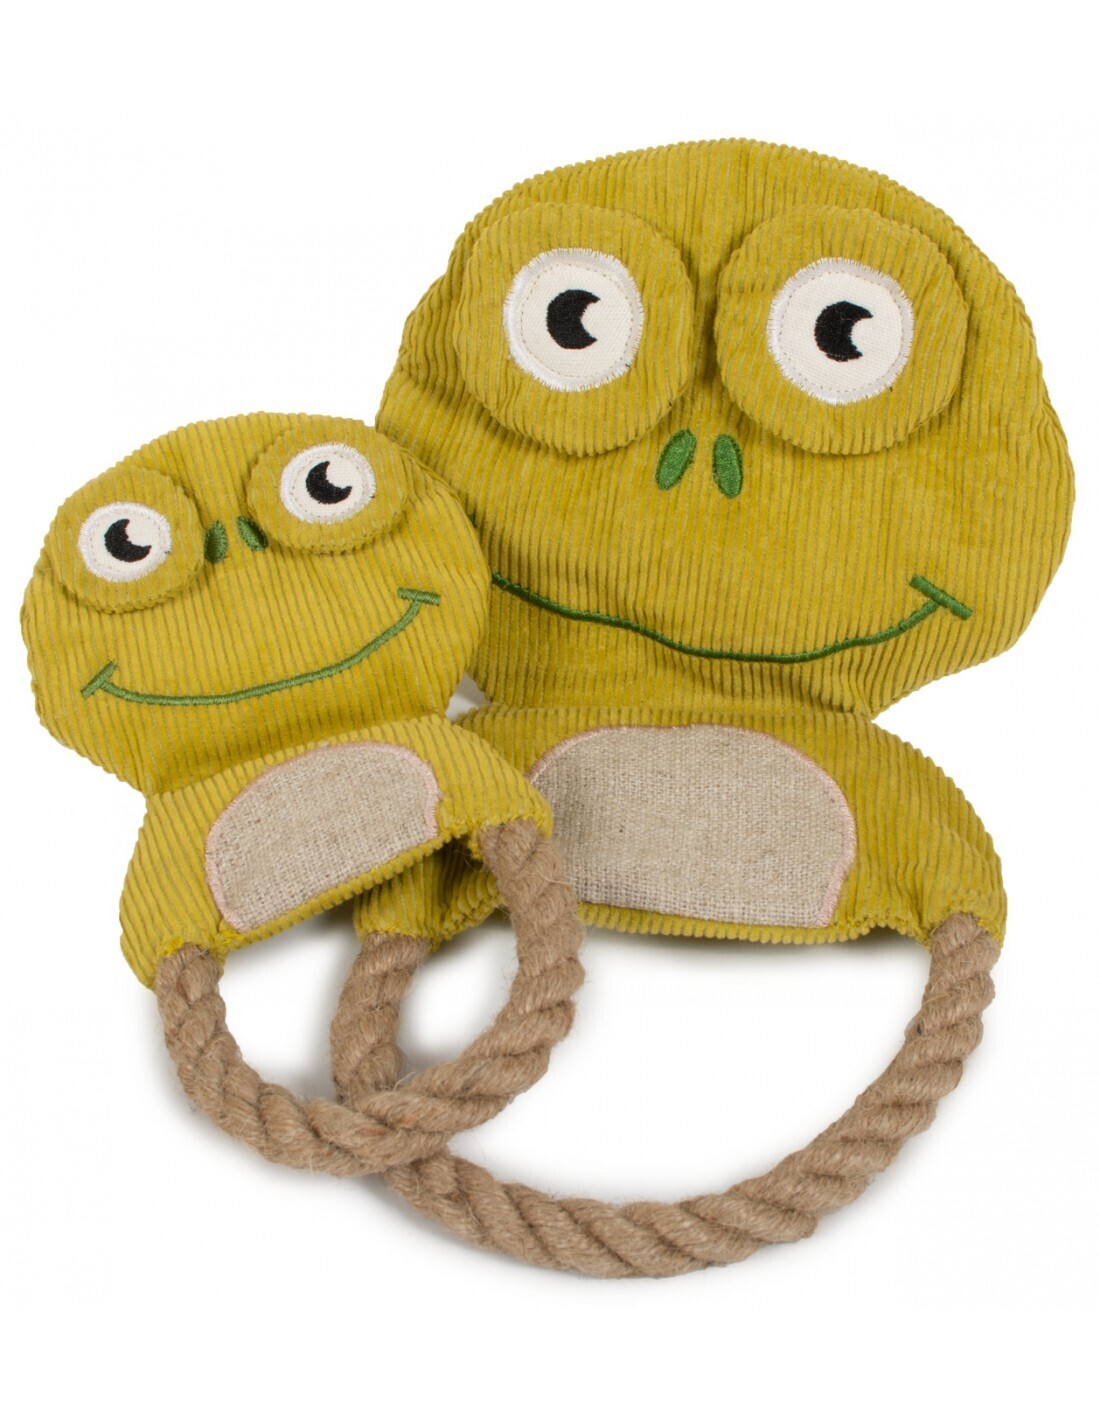 Frog Plush Natural Toys pack of 6 - Stock